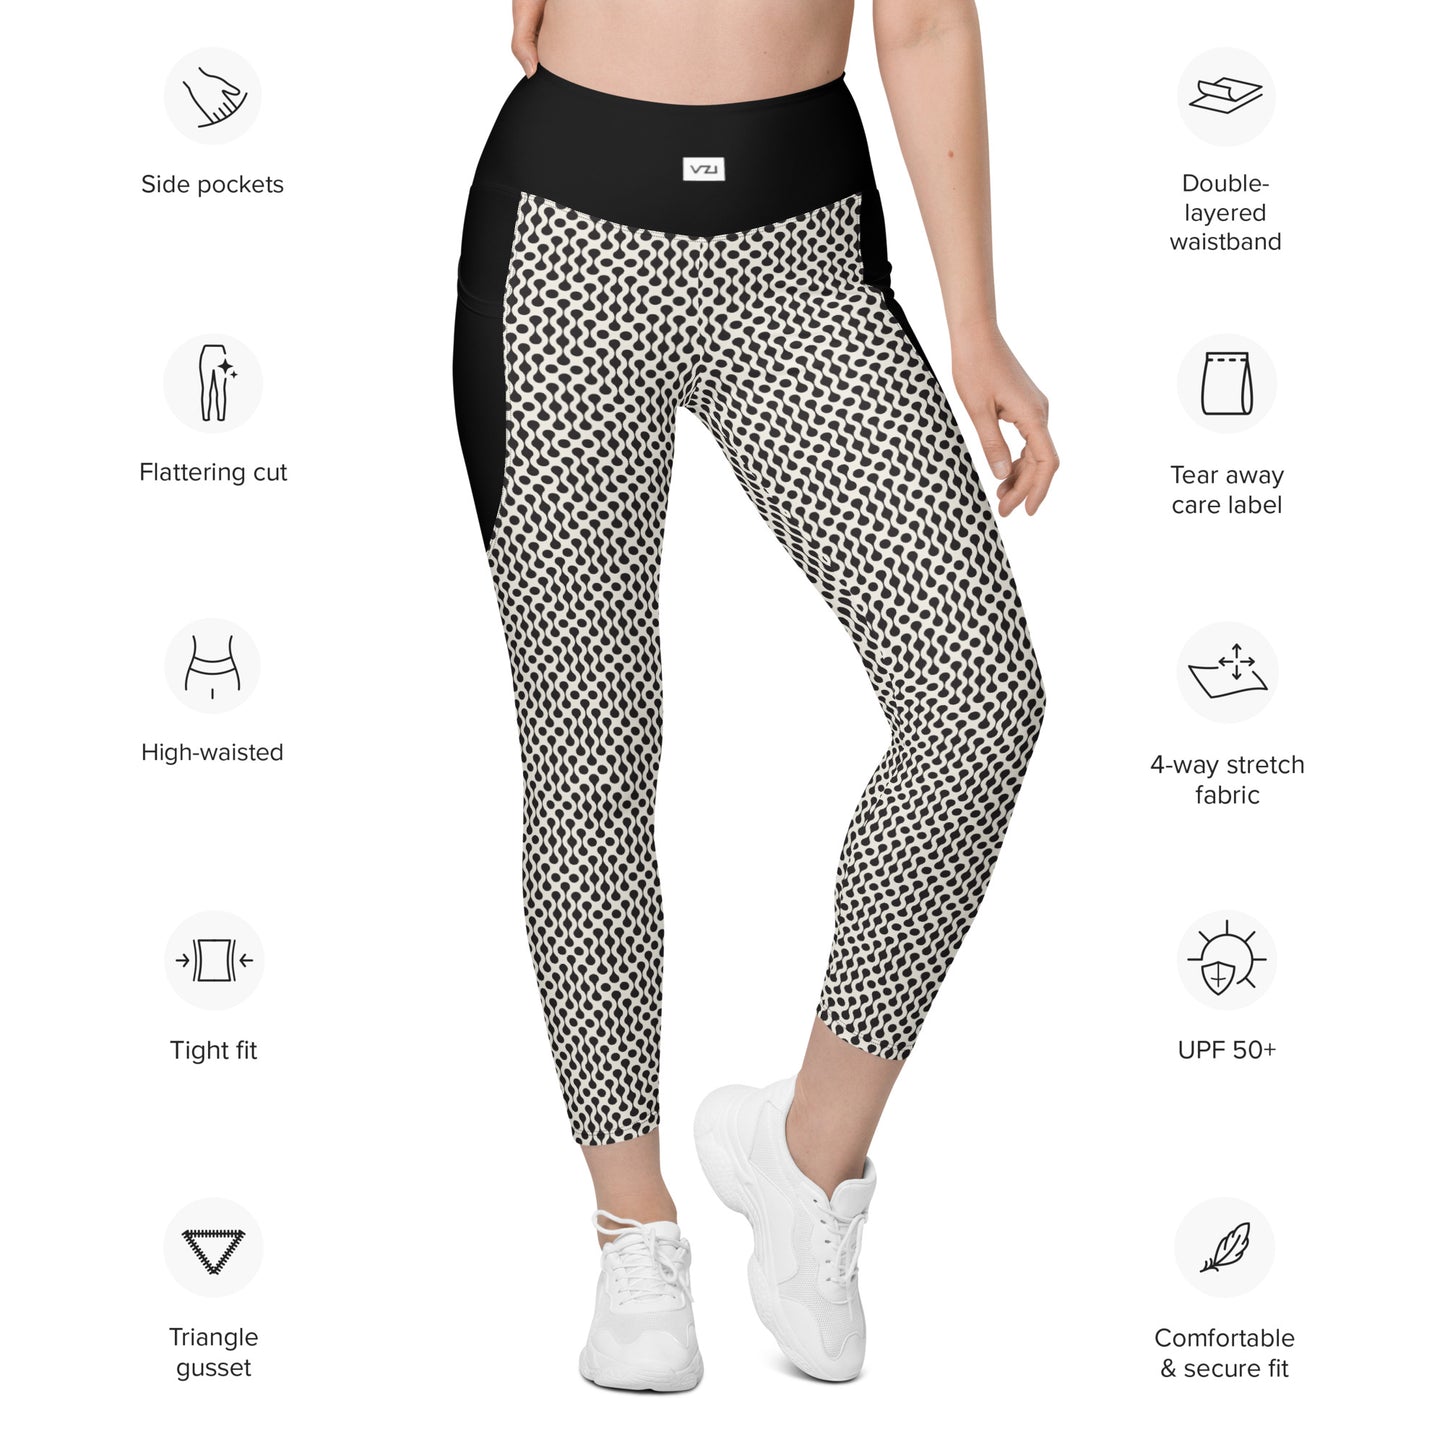 S-shaped Seamless - Leggings with pockets - High waisted, Tight fit, UPF 50+